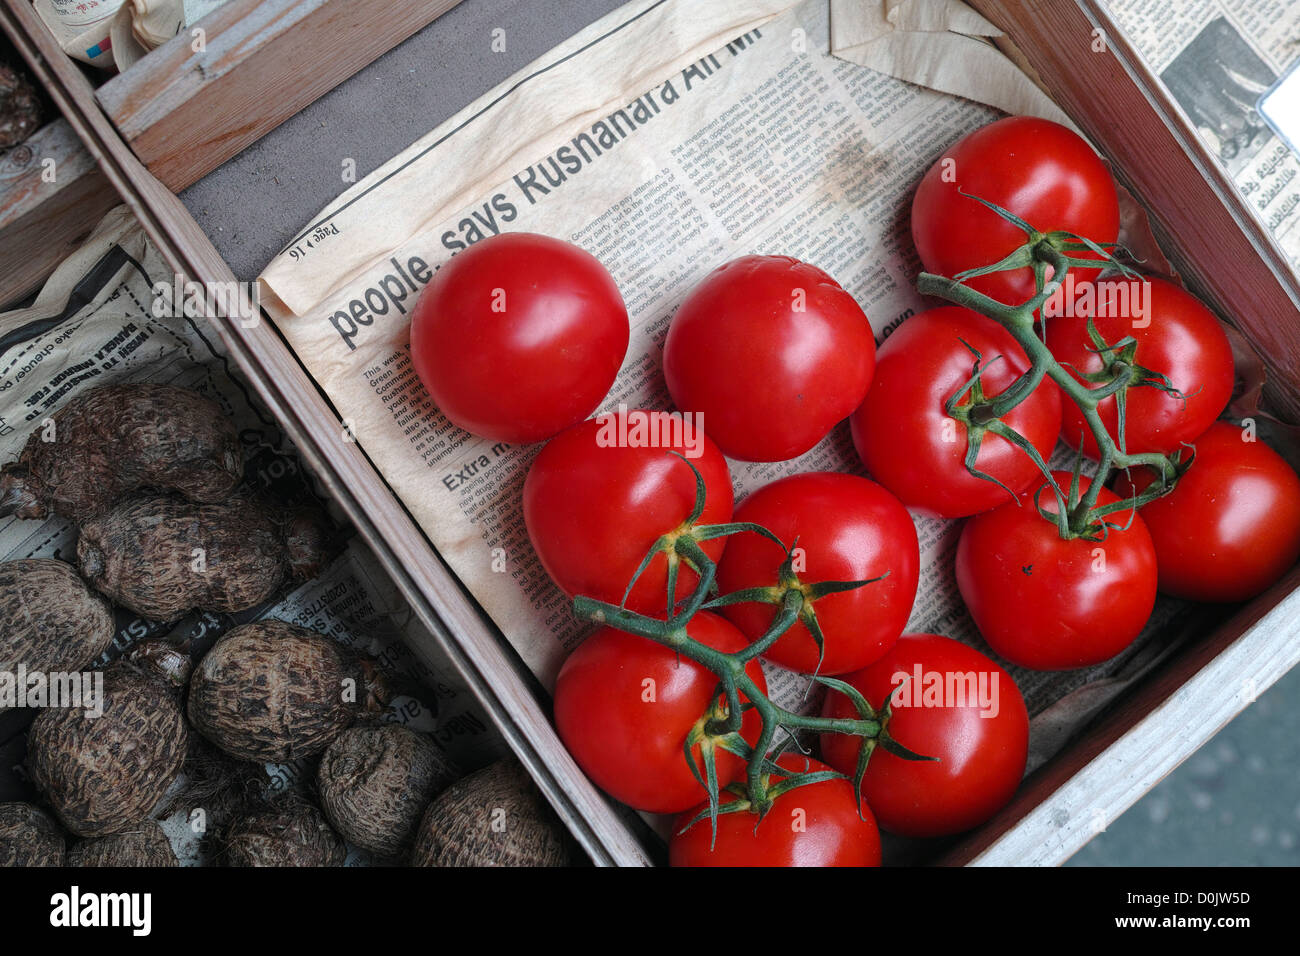 Tomatoes for sale in Shoreditch. Stock Photo